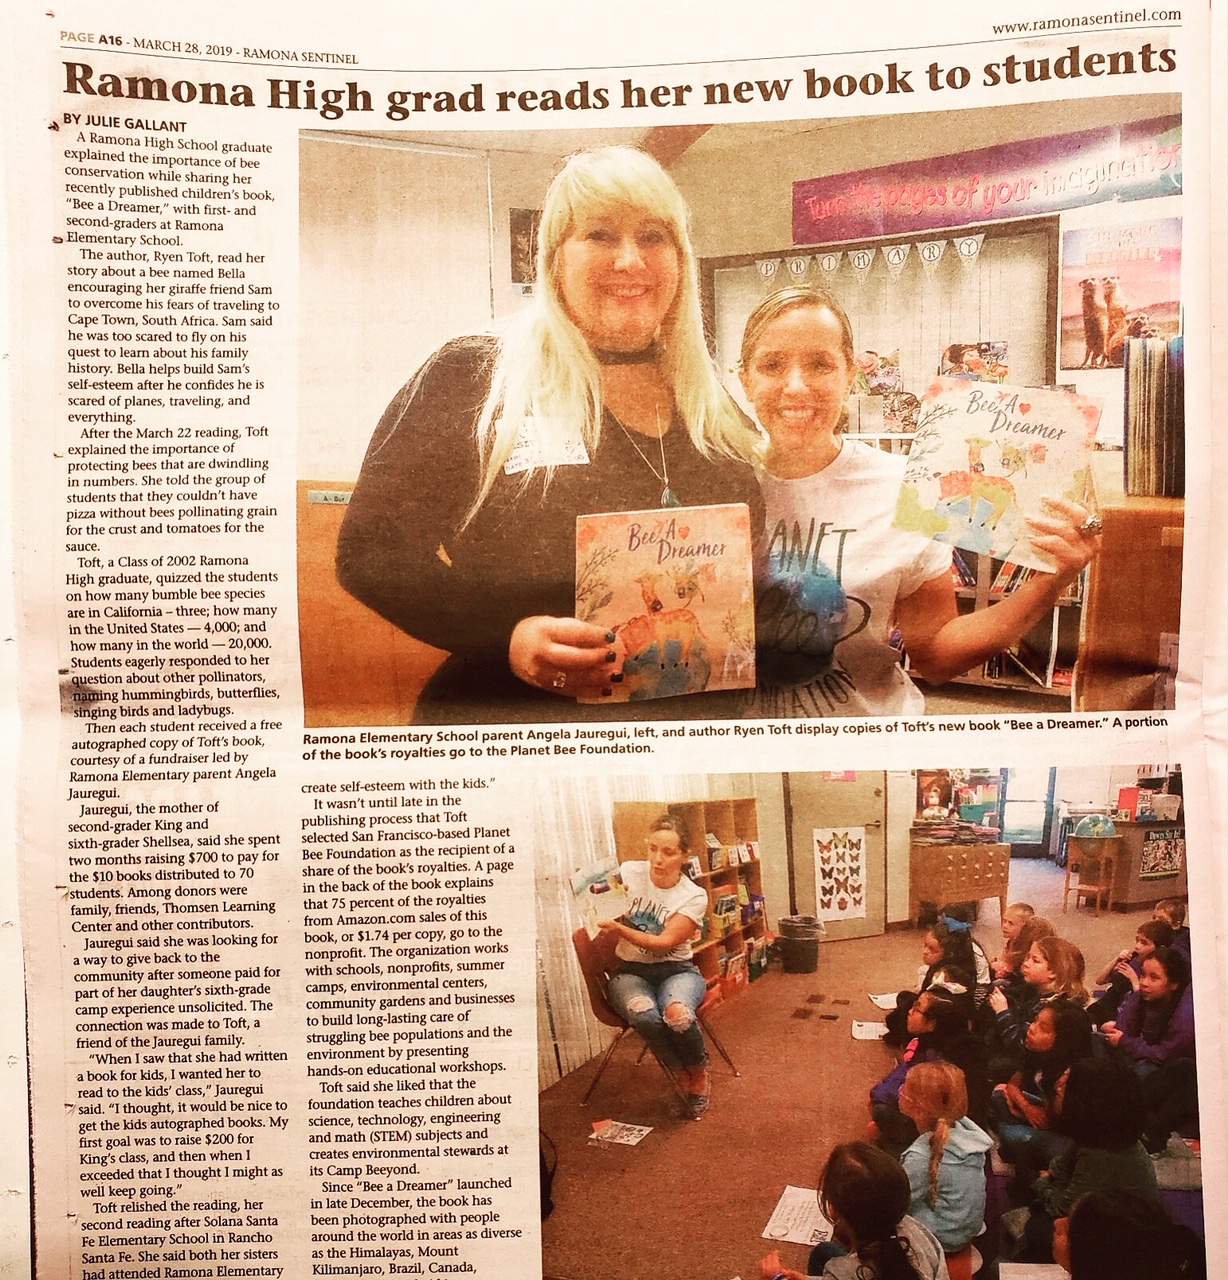 An image of the Ramona Sentinel newspaper article on Ryen Toft's reading of "Bee A Dreamer" at the school.